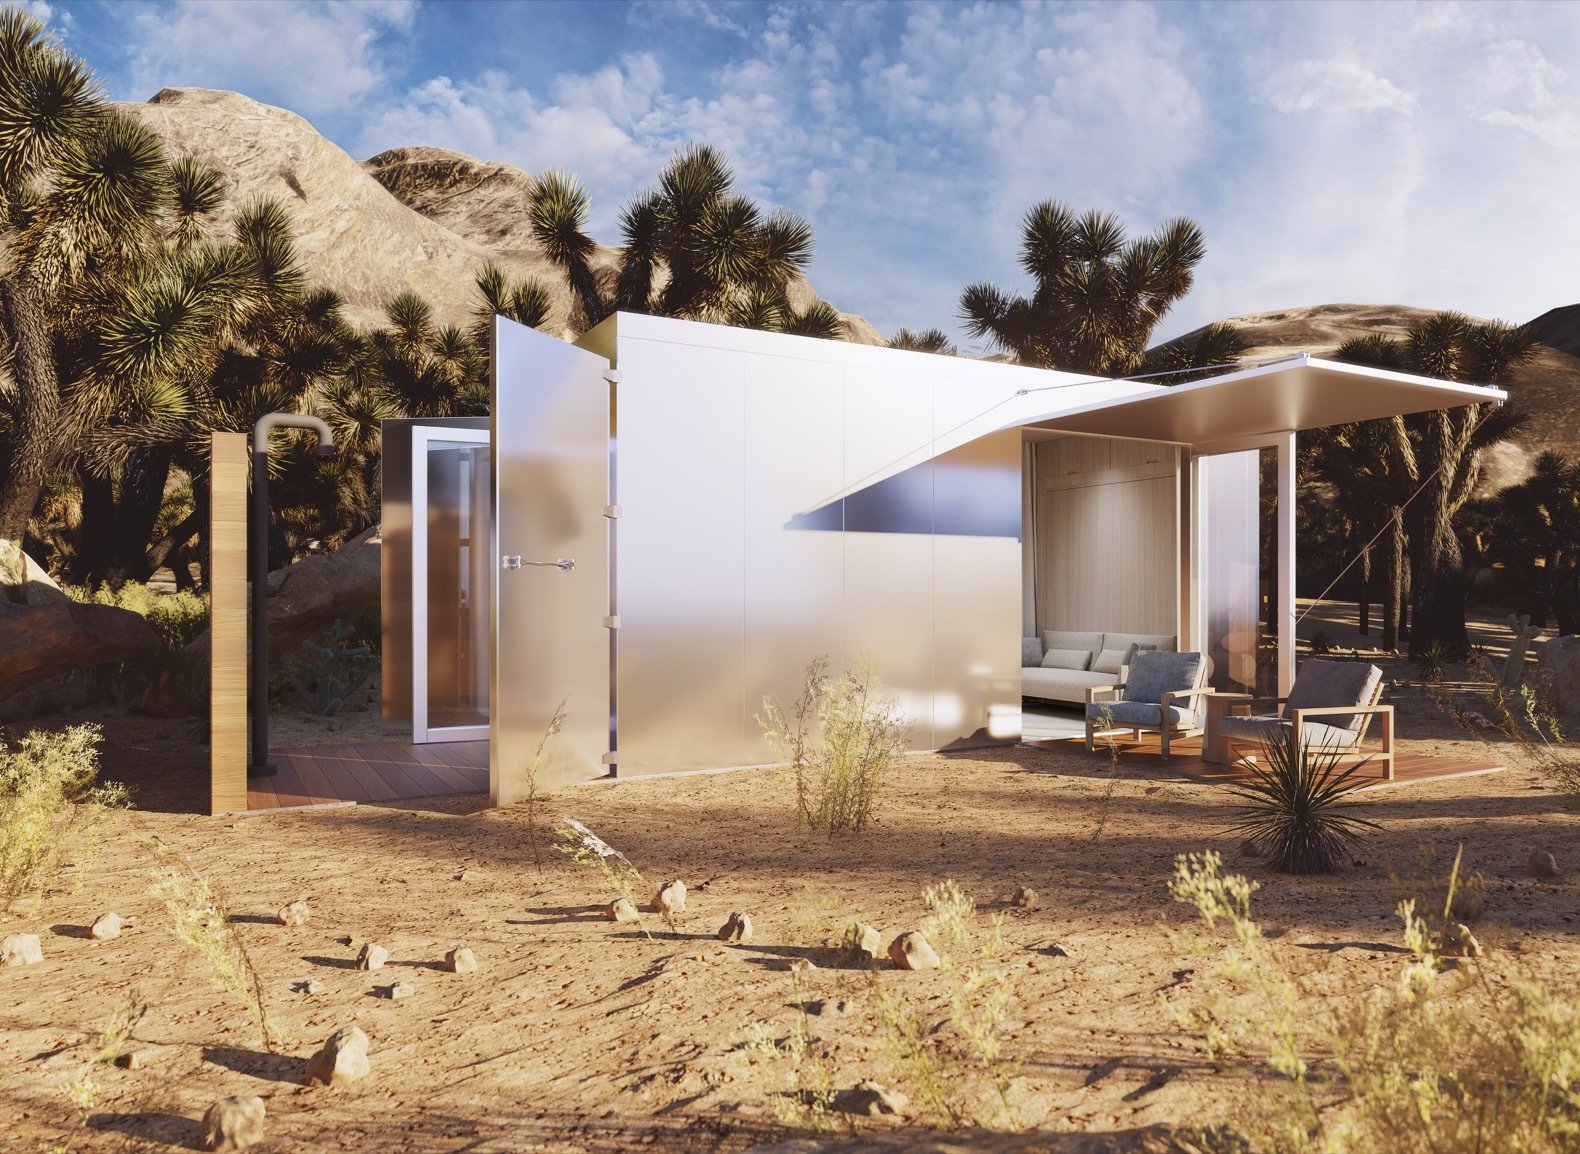 These Luxe New Prefab Homes Are Designed for Off-Grid Living